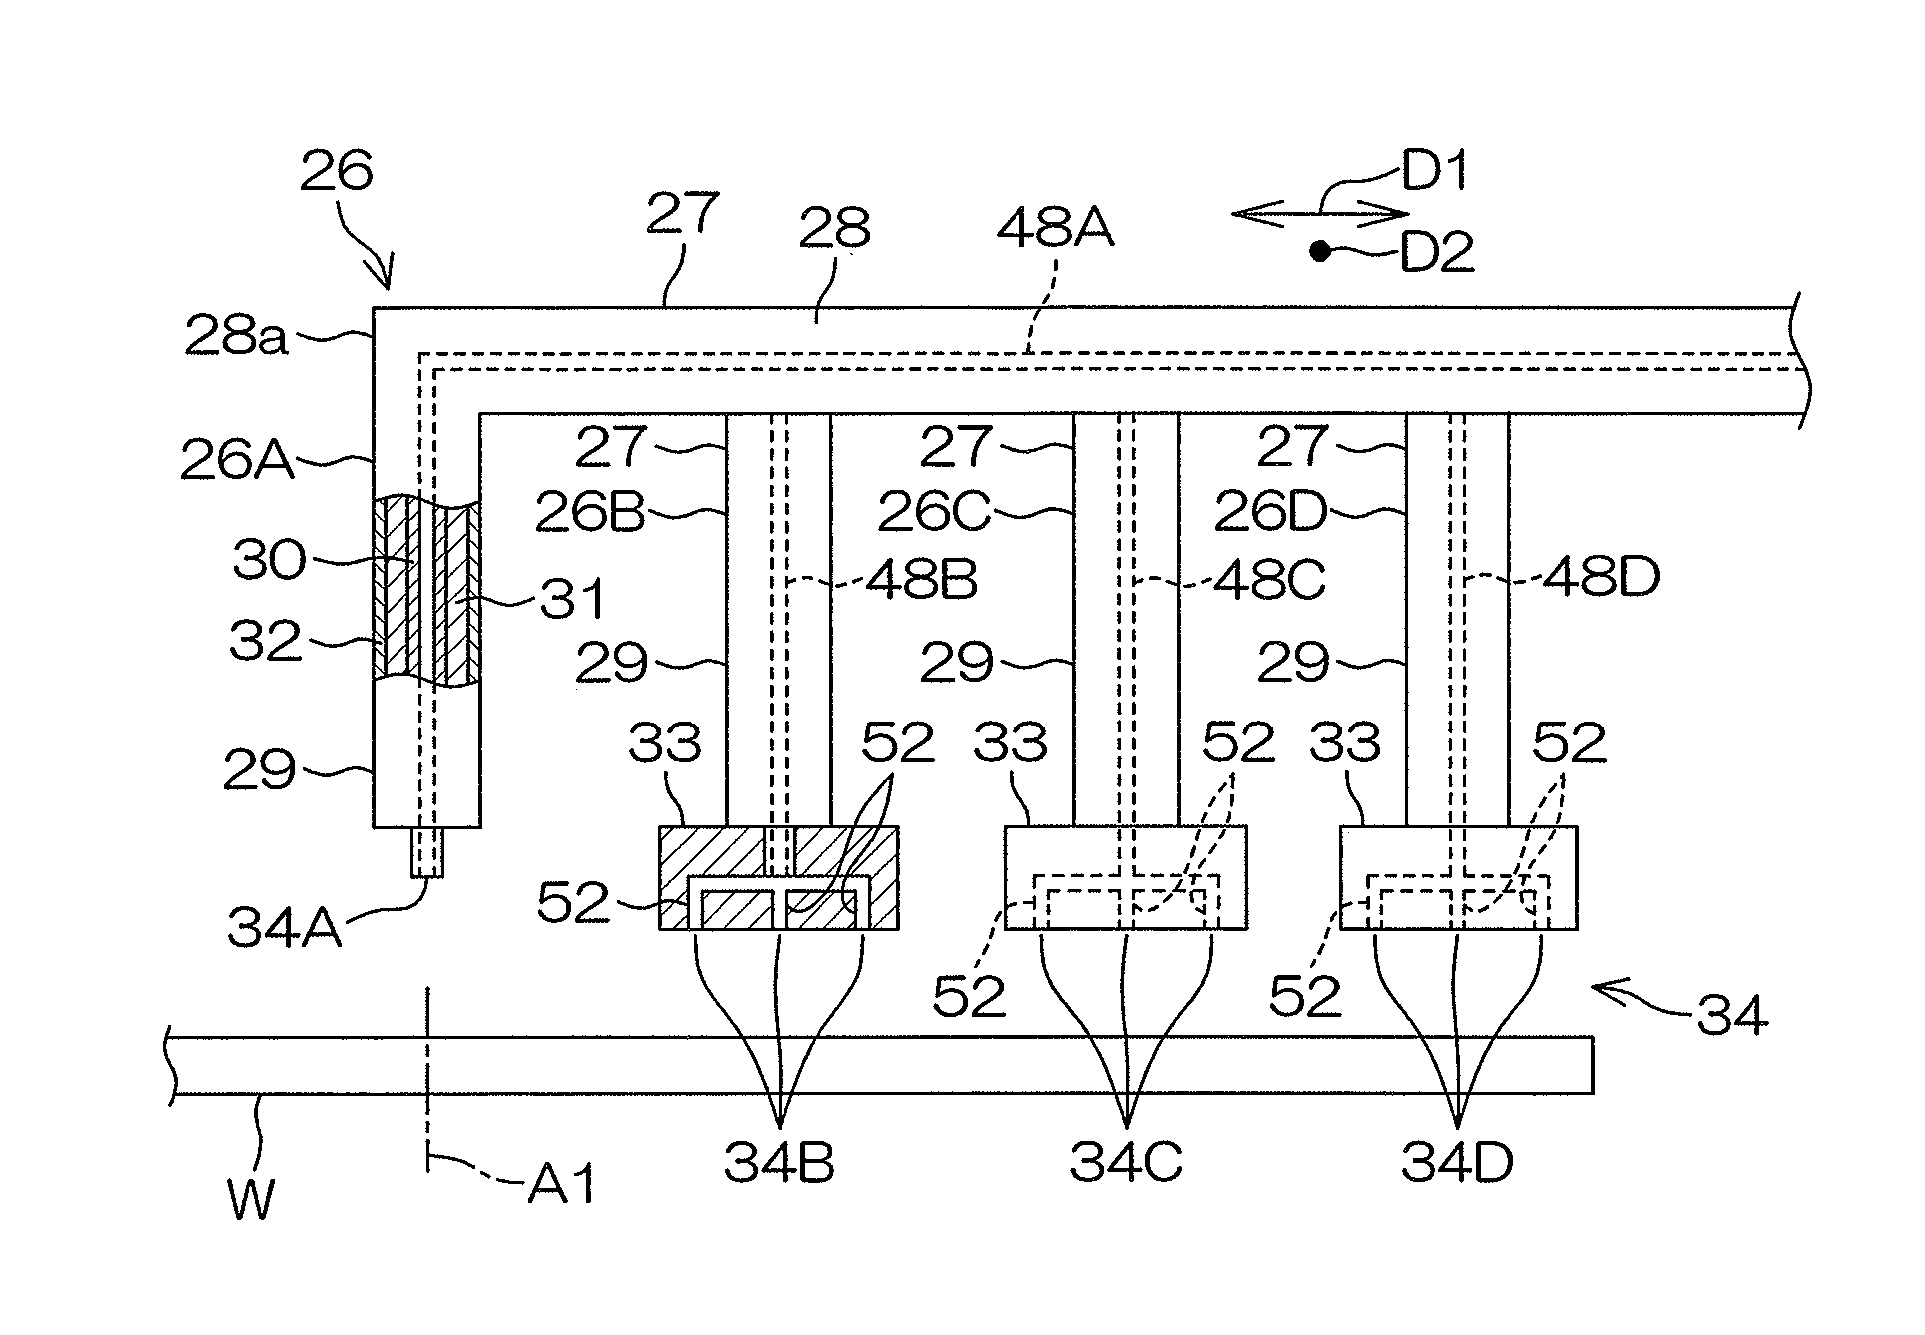 Substrate processing apparatus